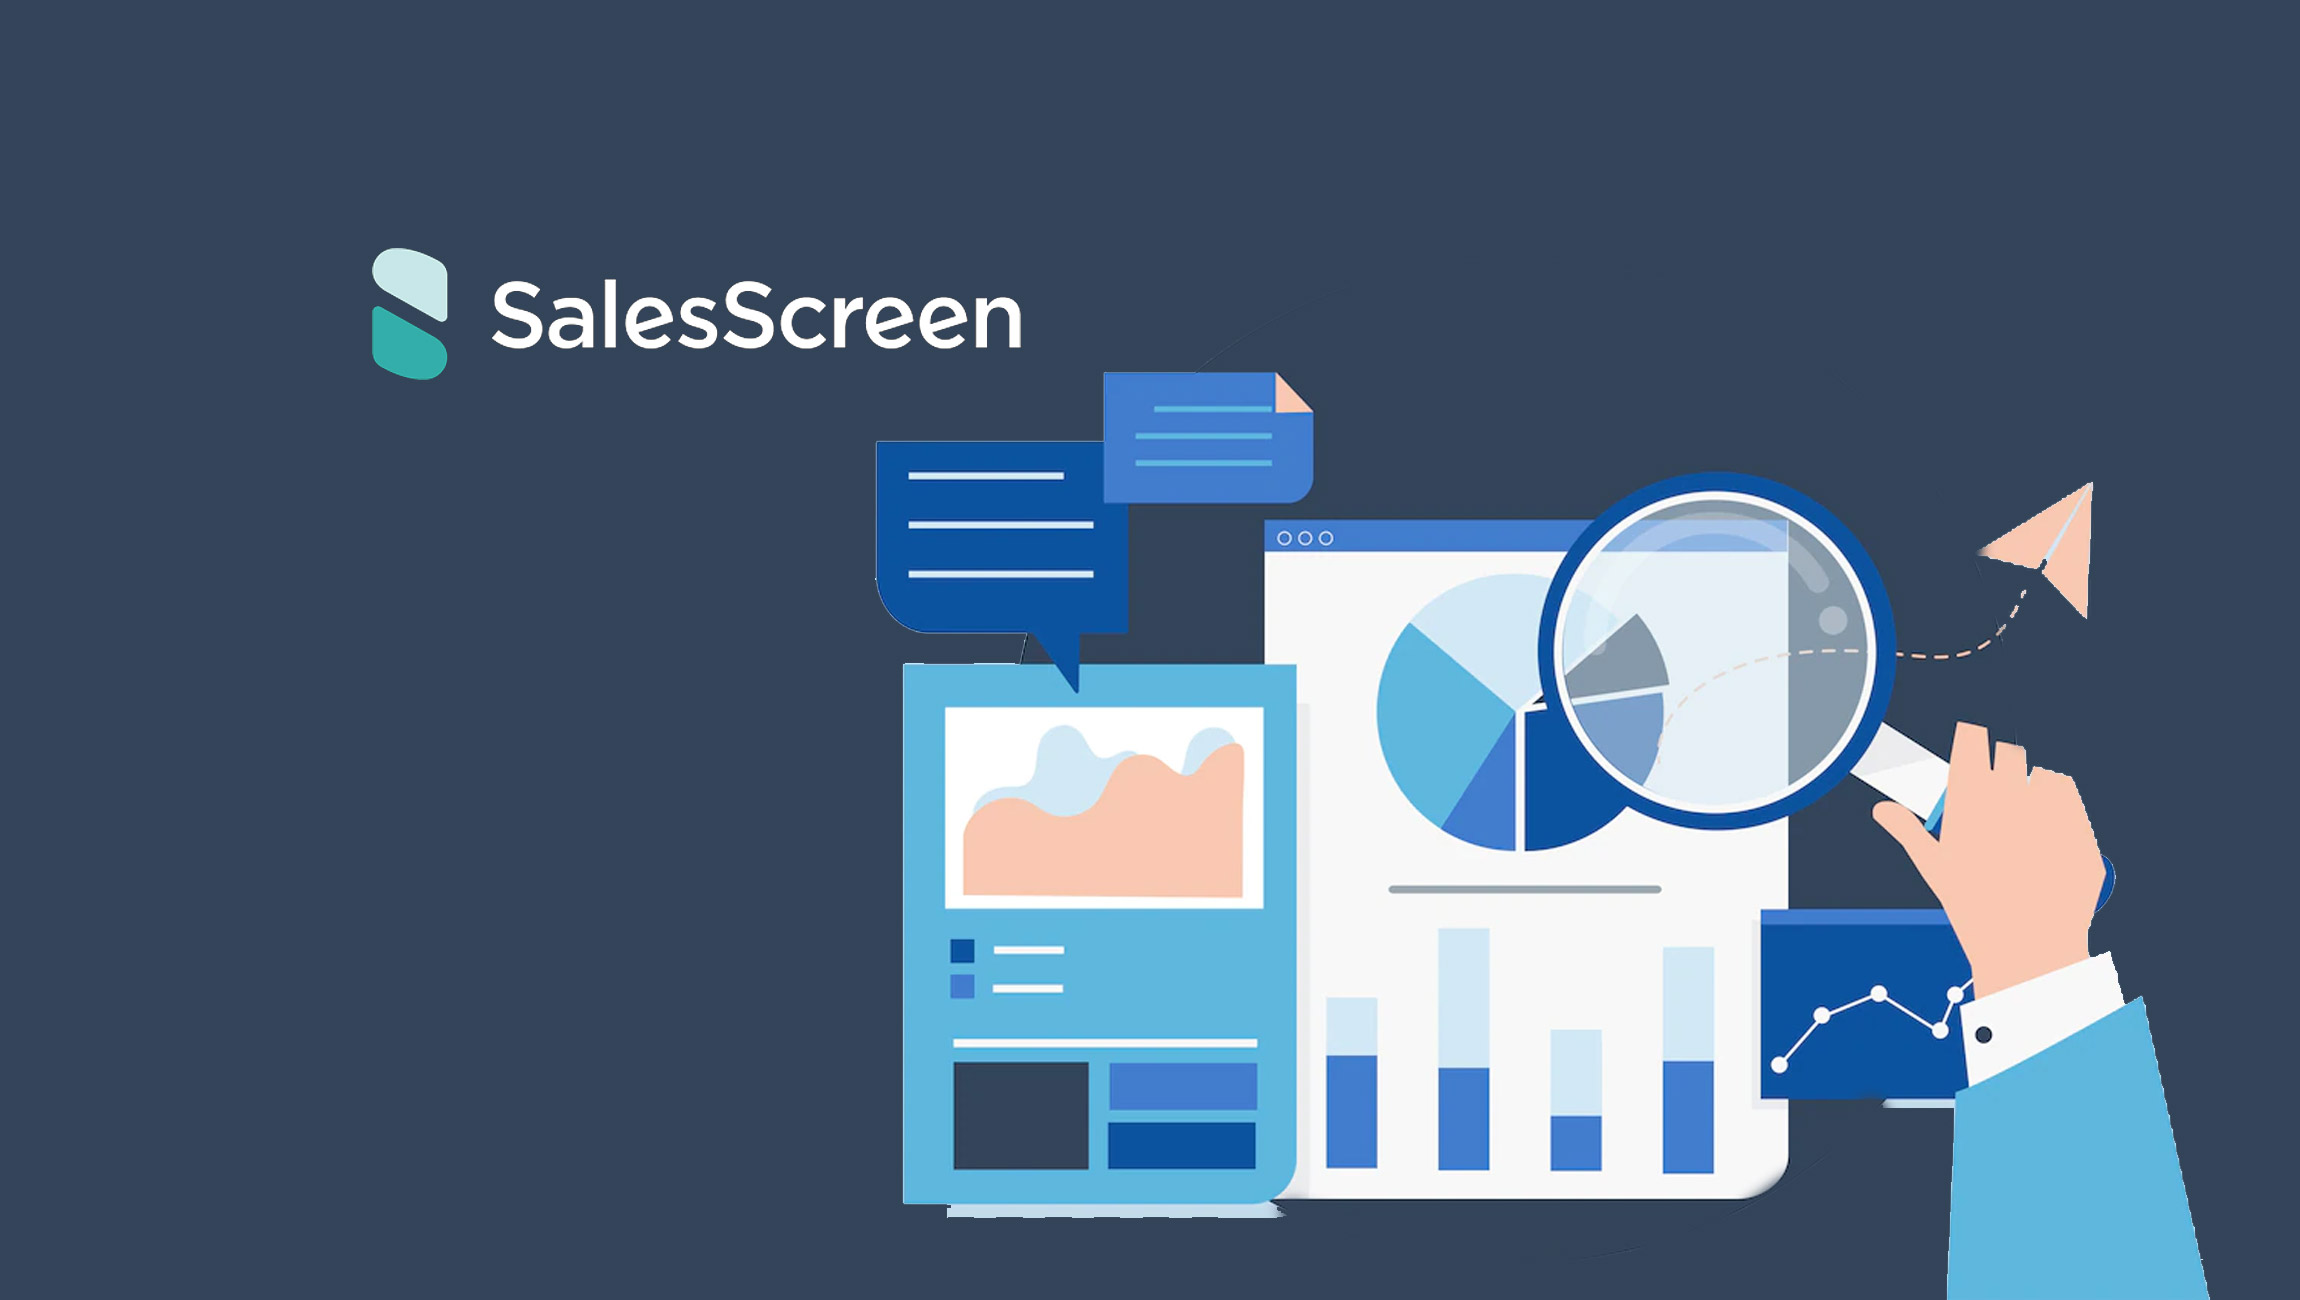 SalesScreen Discovers A Startling Perception Gap Between Sales Managers and Reps